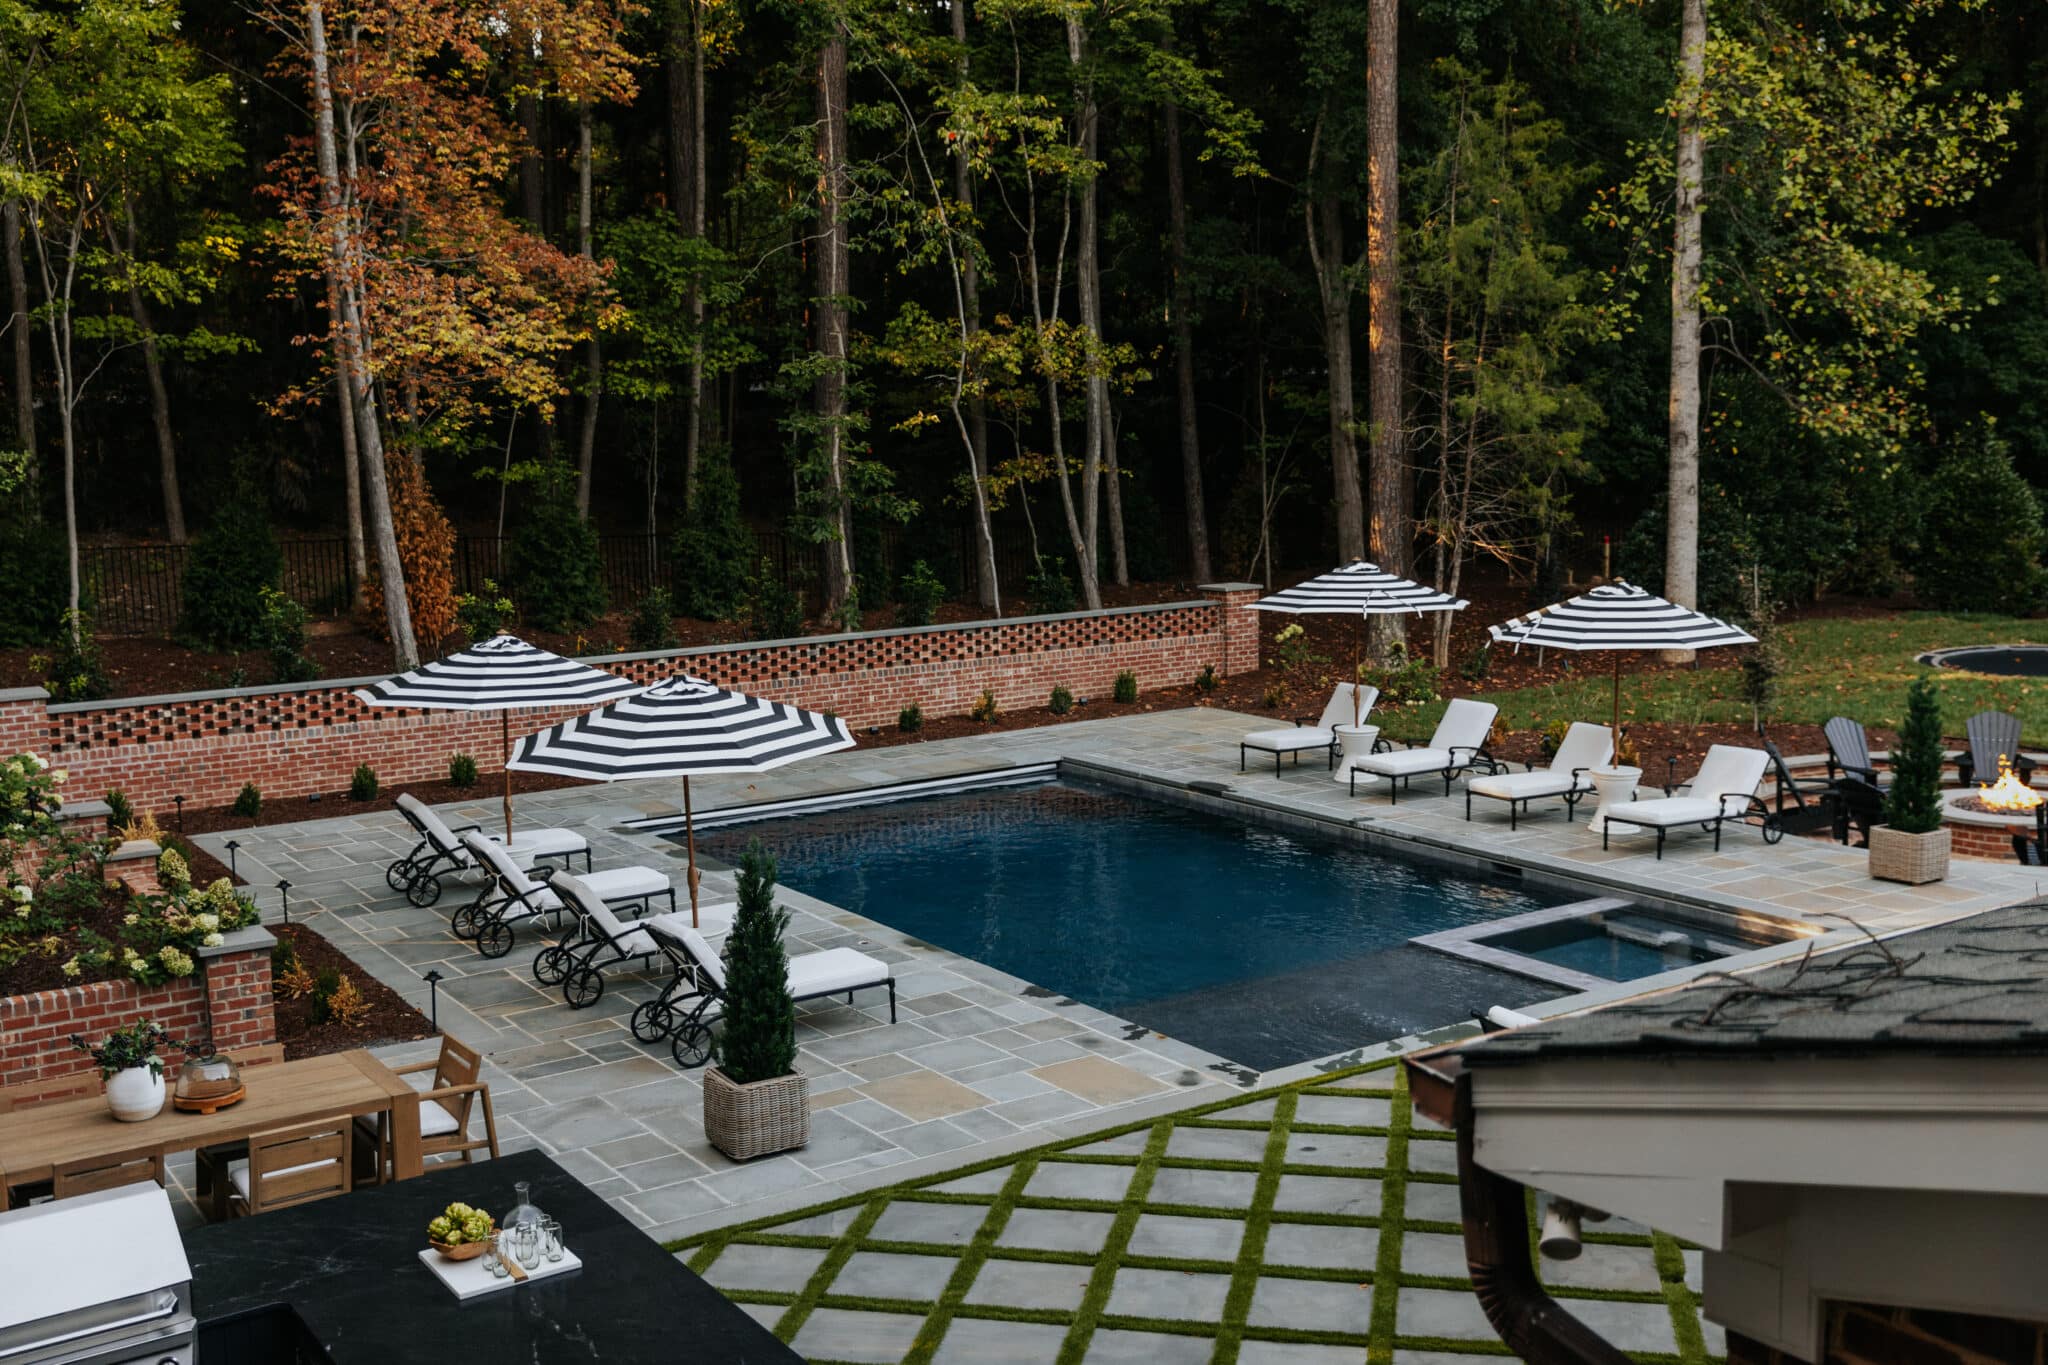 Chris Loves Julia | Back patio and in-ground pool surrounded by black iron furniture with white cushions